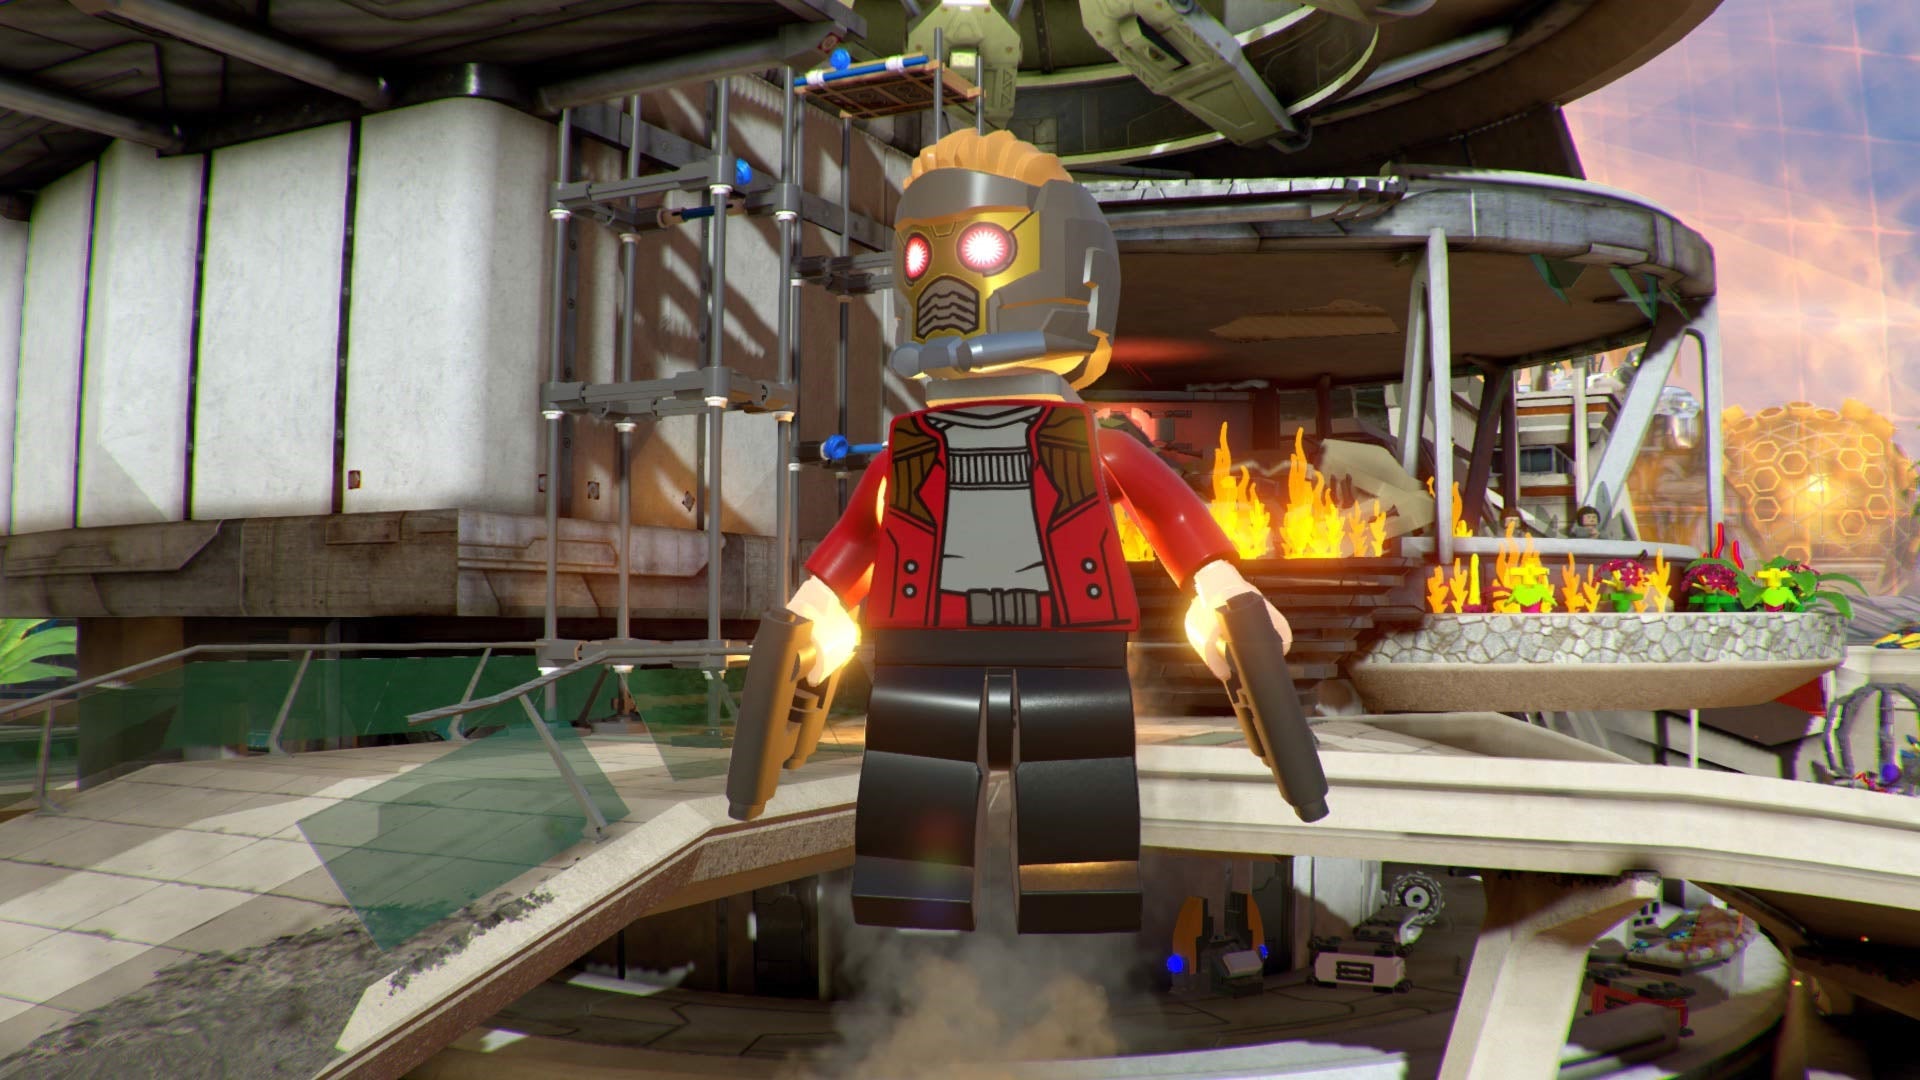 Lego Marvel character Star-Lord in a virtual game environment.